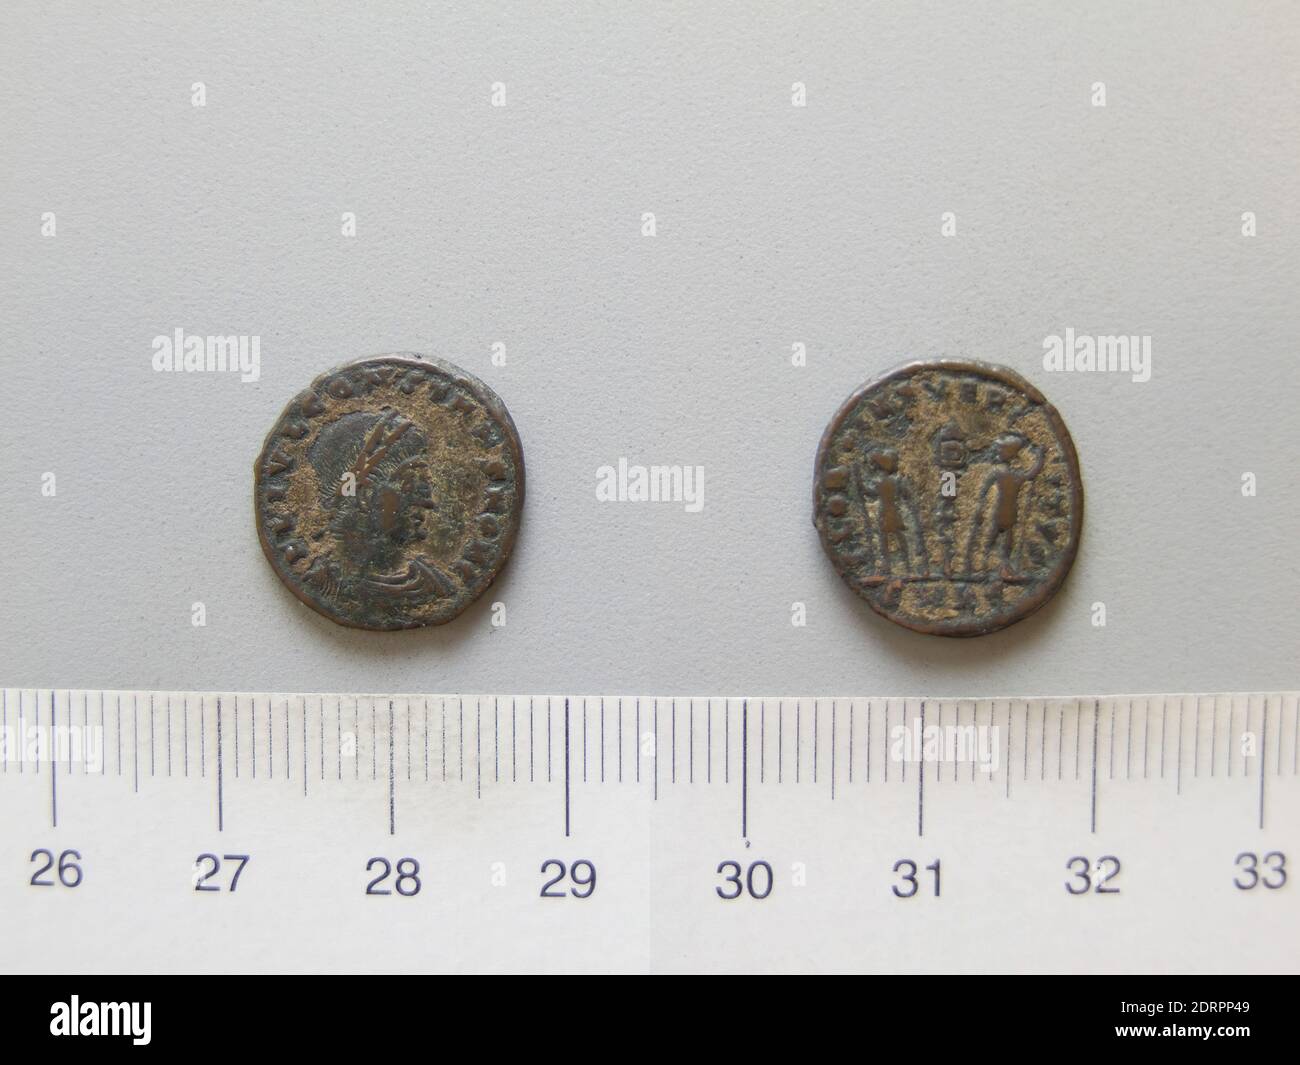 Ruler: Constantine I, Emperor of Rome, A.D. 285–337, ruled A.D. 306–337, Mint: Cyzicus, Honorand: Constans I, Emperor of Rome, ca. A.D. 323–350, ruled 337–50, 1 Nummus of Constantine I, Emperor of Rome from Cyzicus, 335–37, Argentiferous bronze, 2.11 g, 6:00, 16.1 mm, Made in Cyzicus, Mysia, Roman, 4th century, Numismatics Stock Photo